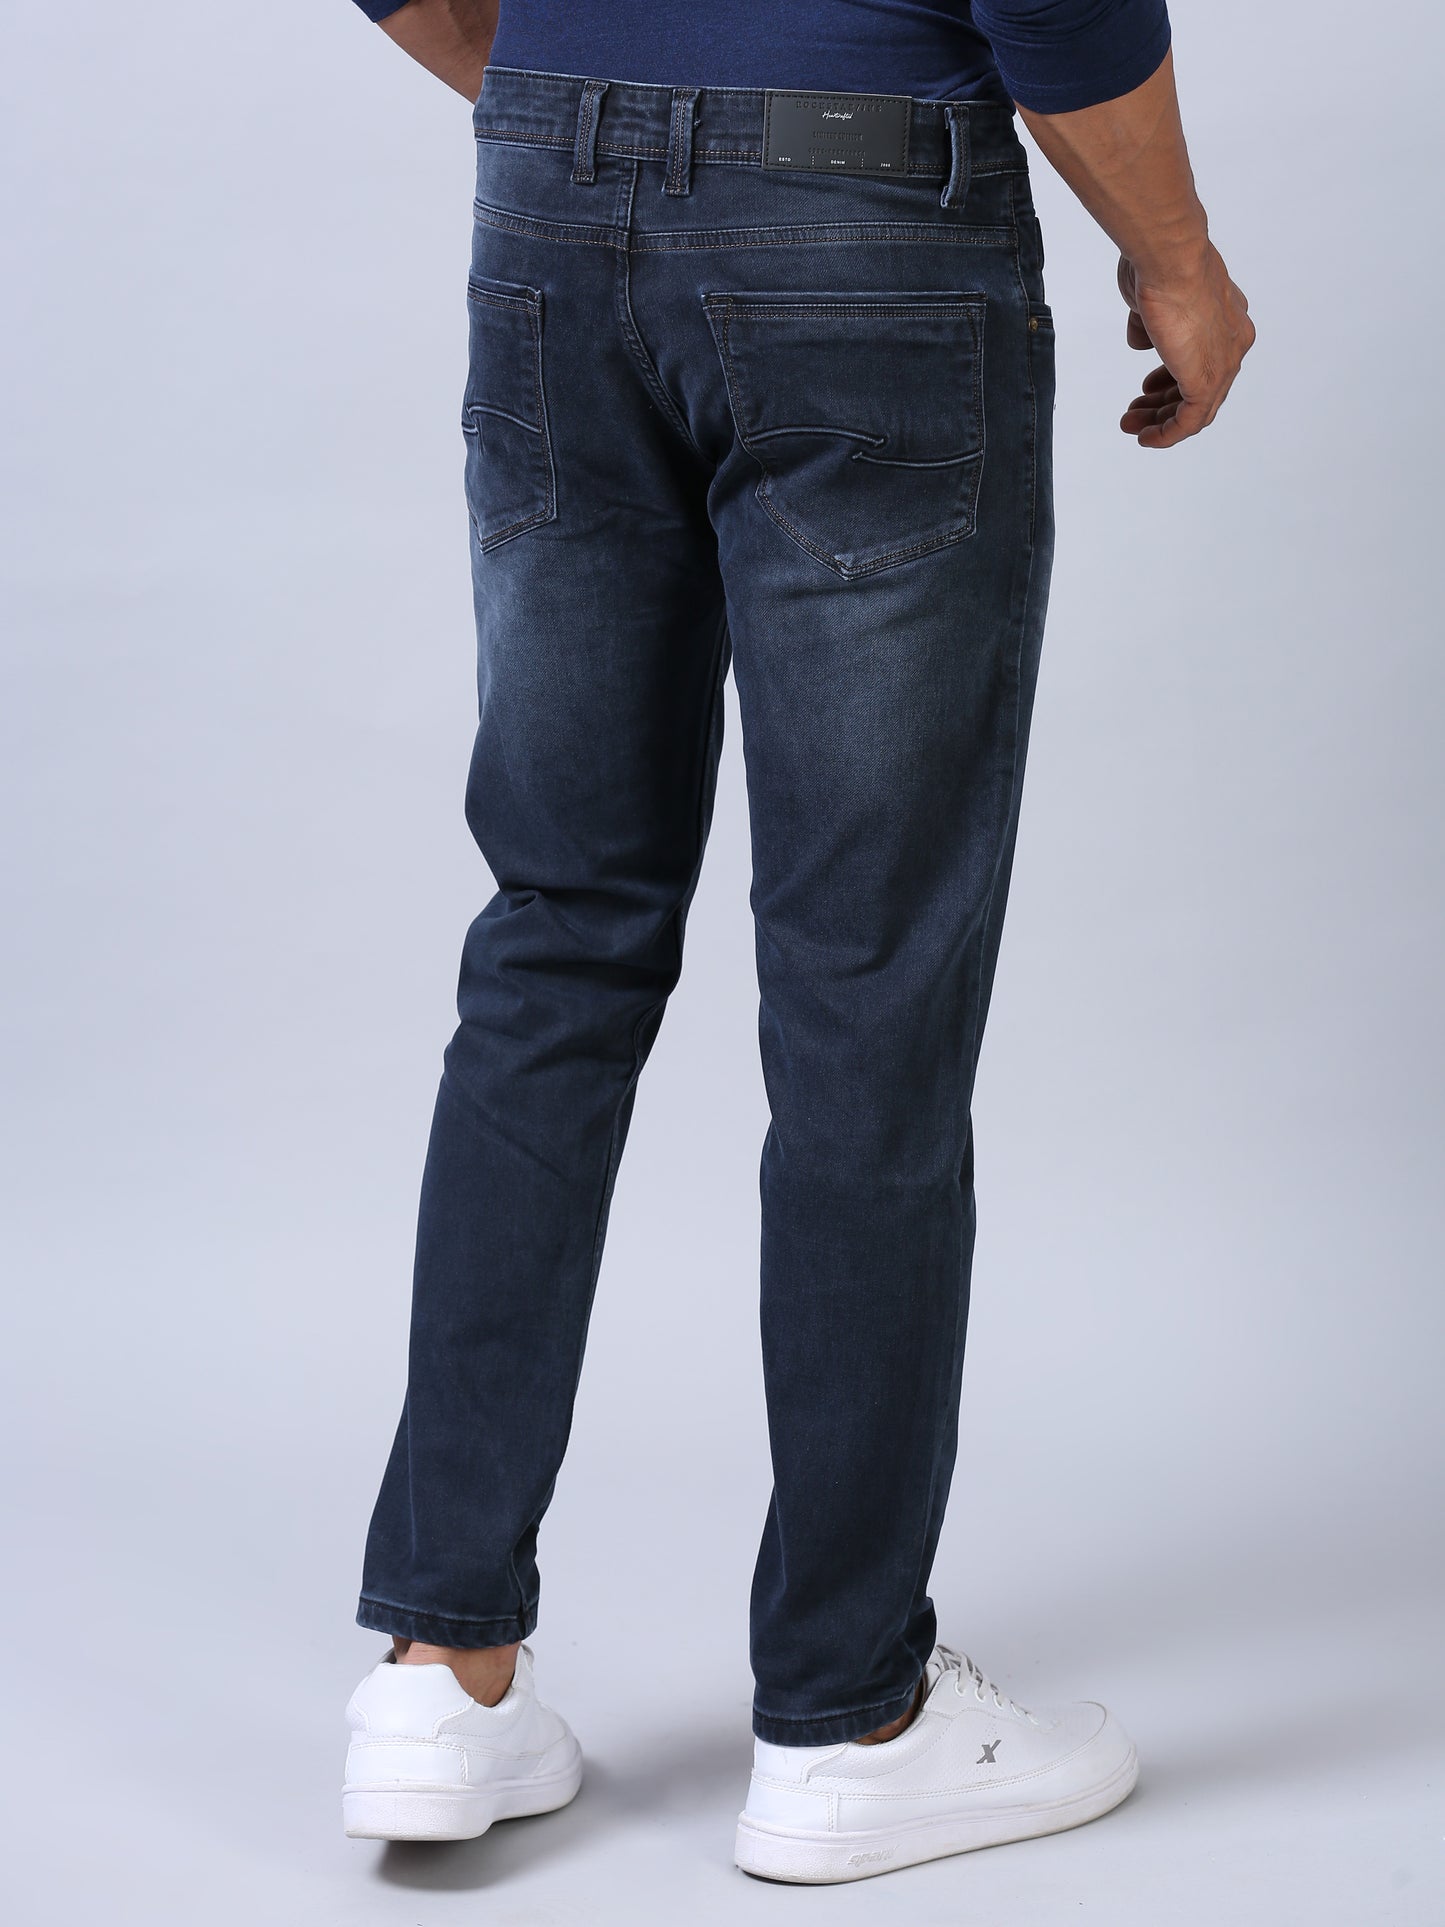 Ankle Fit Jeans - Navy Blue